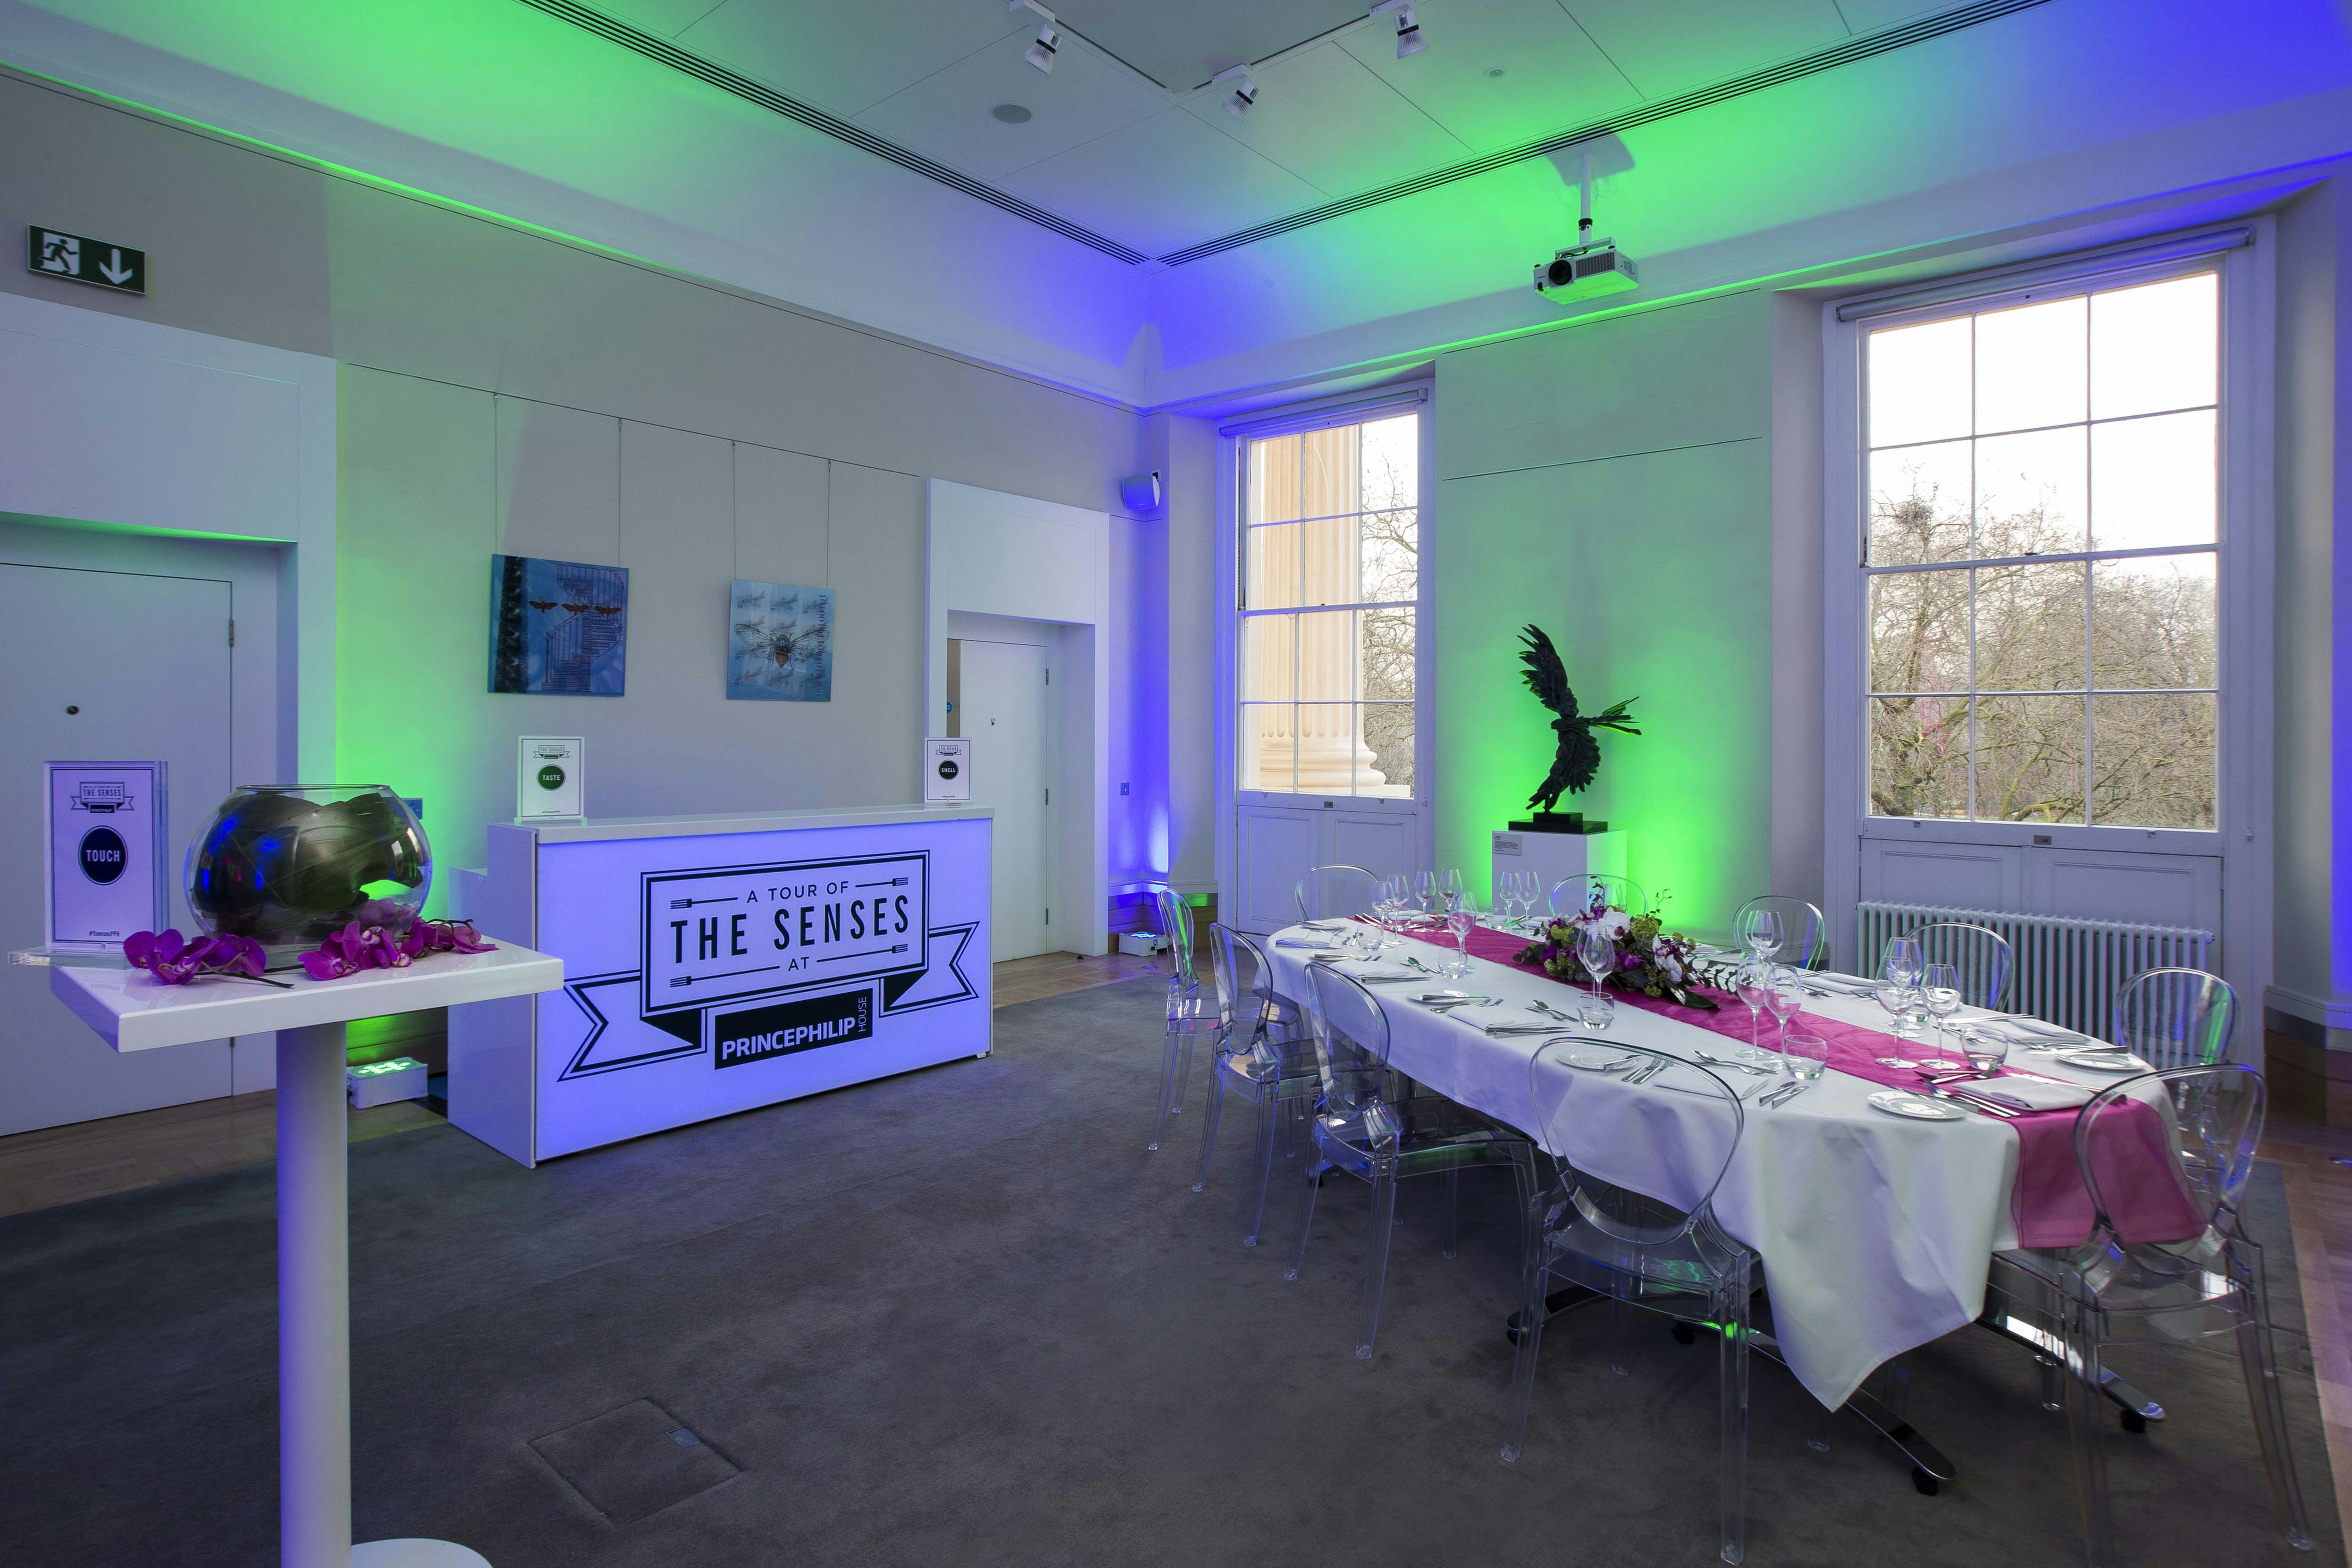 Blank Canvas Venues in London - Prince Philip House